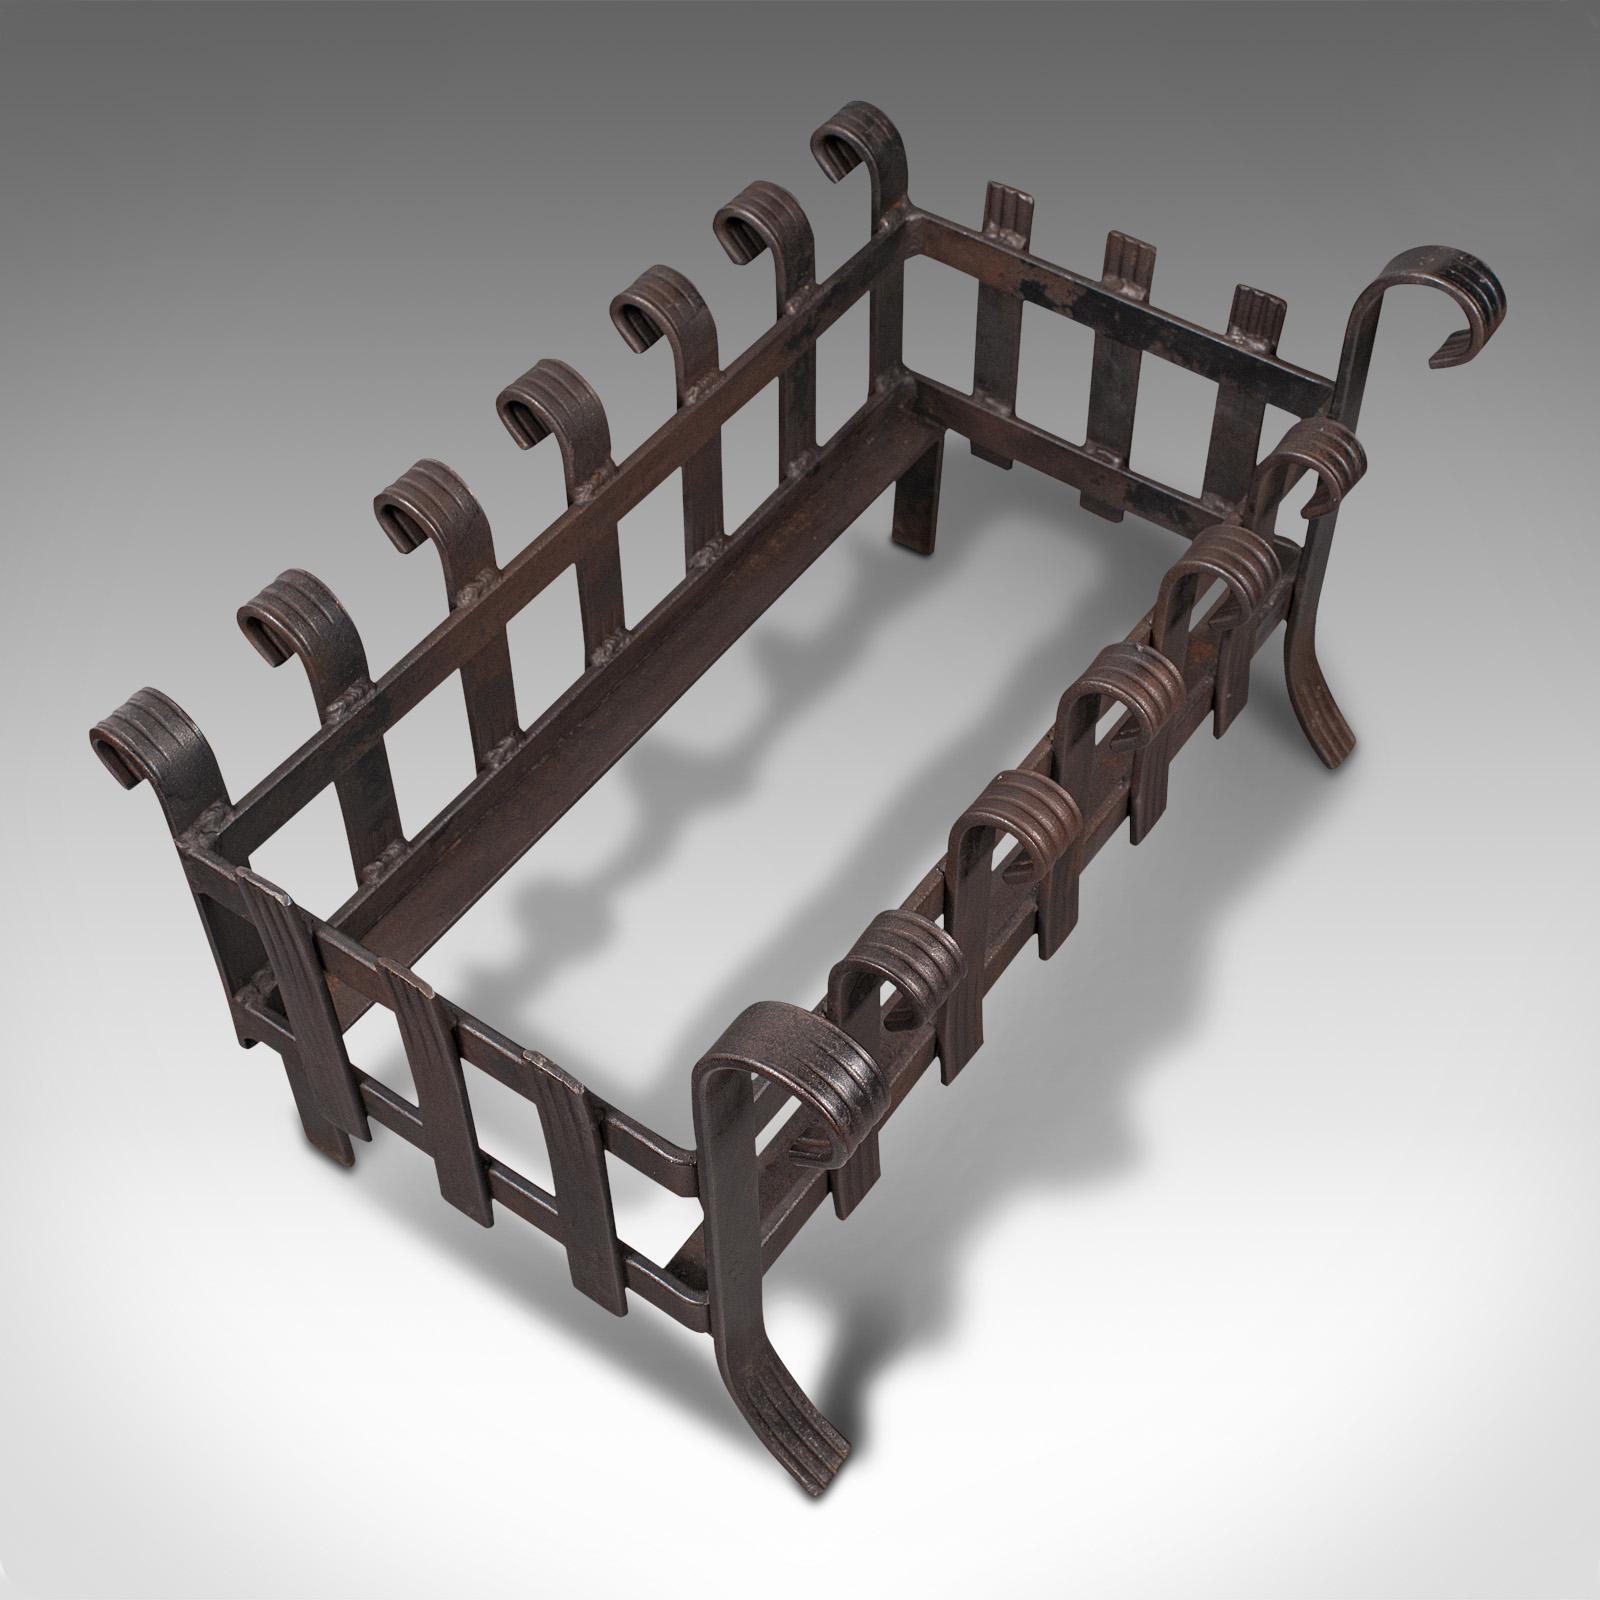 Vintage Fire Basket, English, Iron, Fireplace, Gothic Revival, Mid Century, 1950 For Sale 2